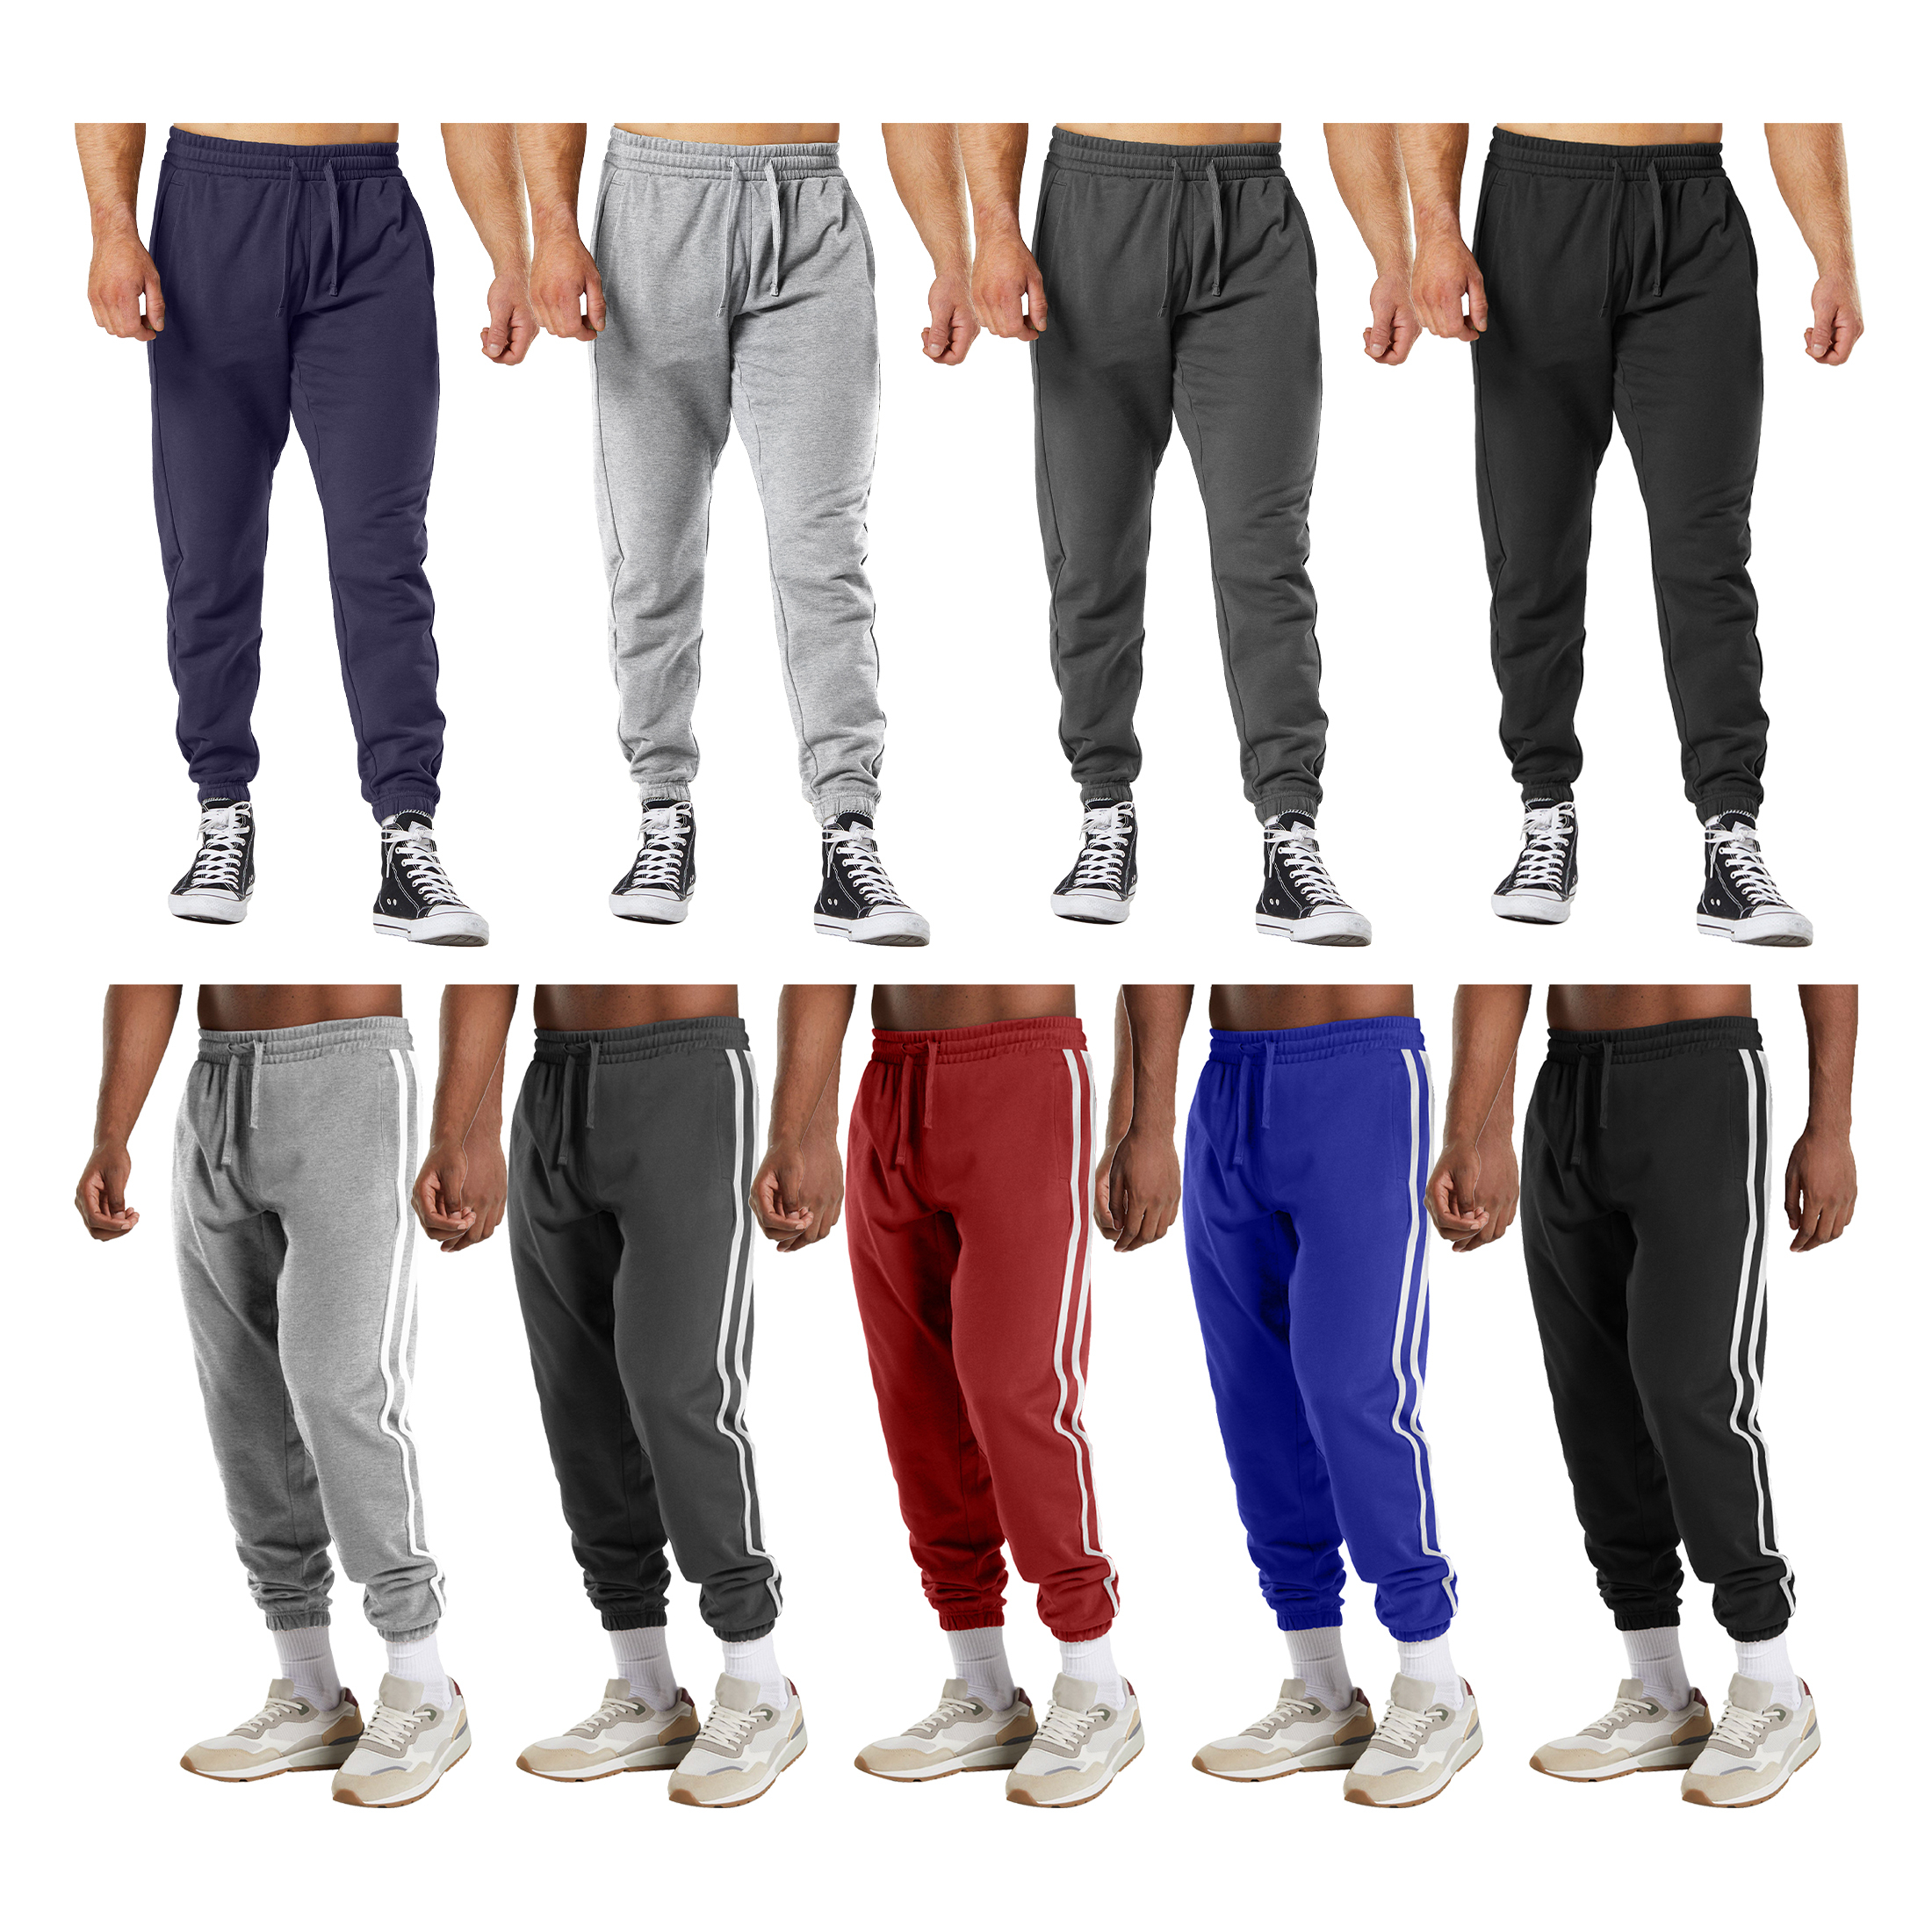 Multi-Pack: Men's Casual Fleece-Lined Elastic Bottom Jogger Pants With Pockets - 2-PACK, L